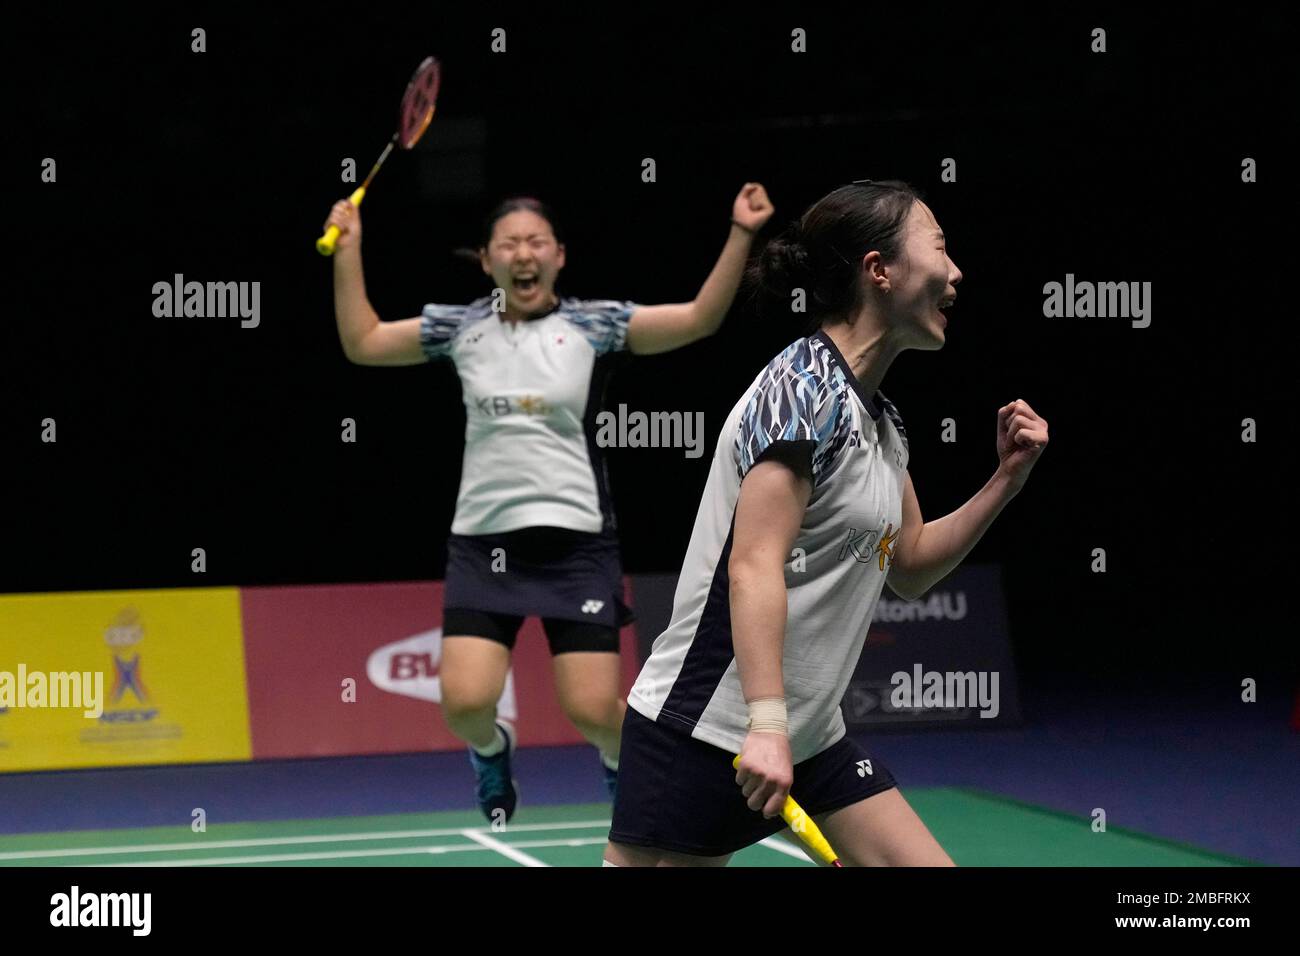 South Koreas Kong Hee-yong, left, and Kim Hye-jeong react after winning over Chinas Huang Dong Ping and Li Wen Mei during their womens double final badminton match at Thomas and Uber Cup